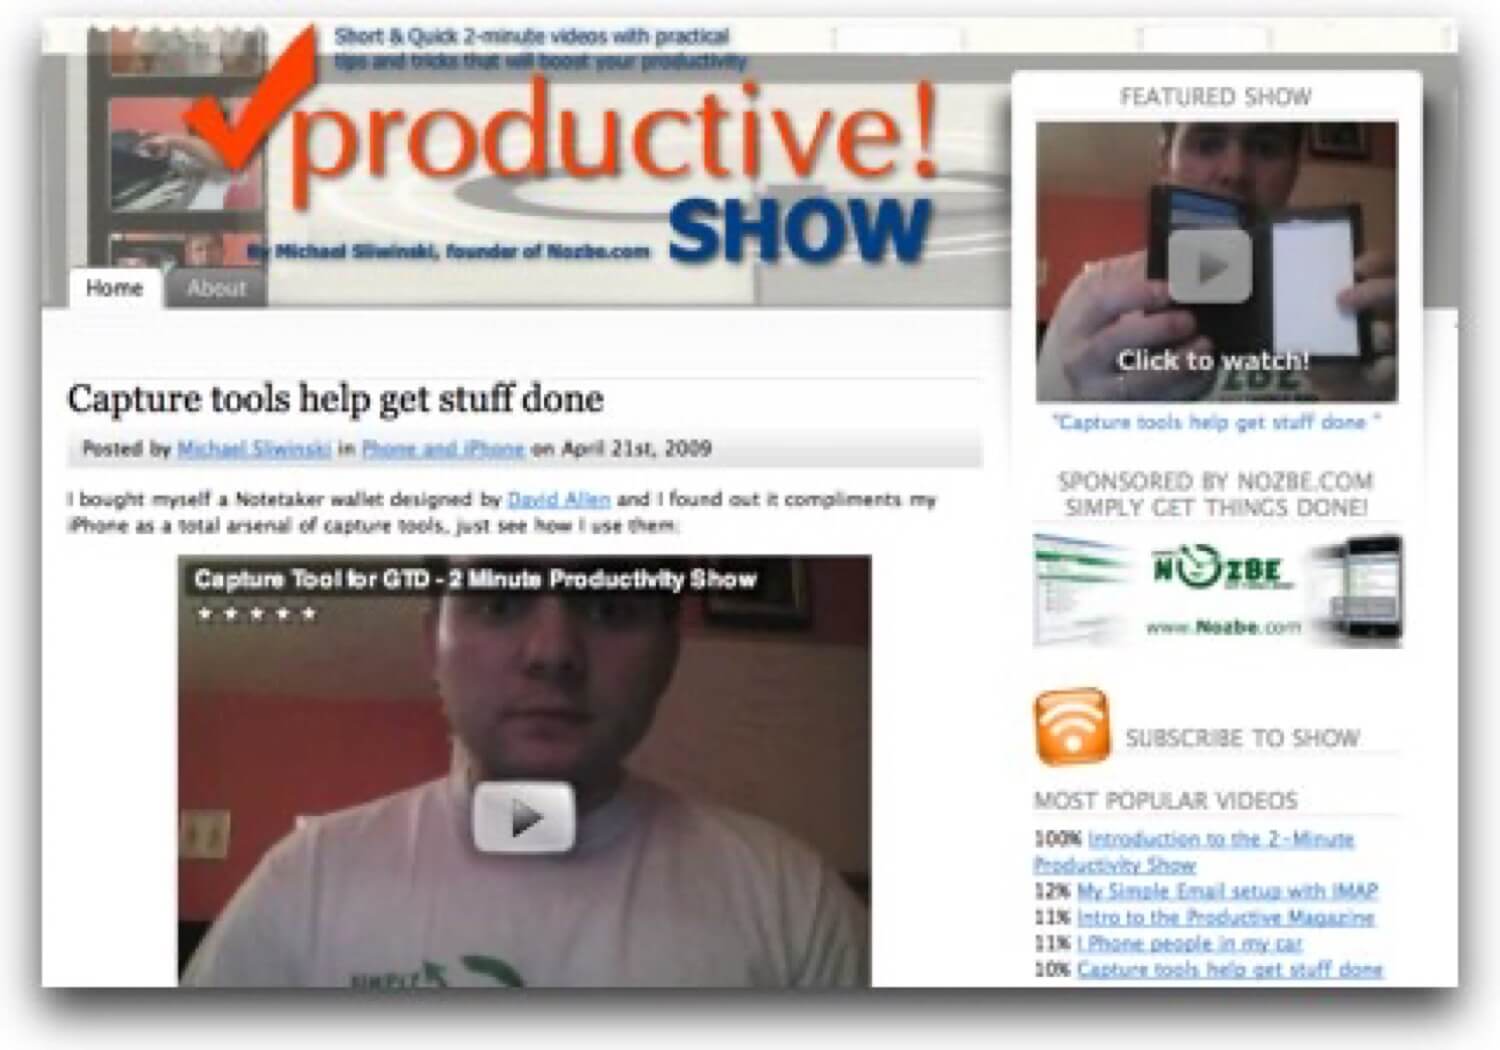 Launch of our sister site - Productive! Show - ProductiveShow.com